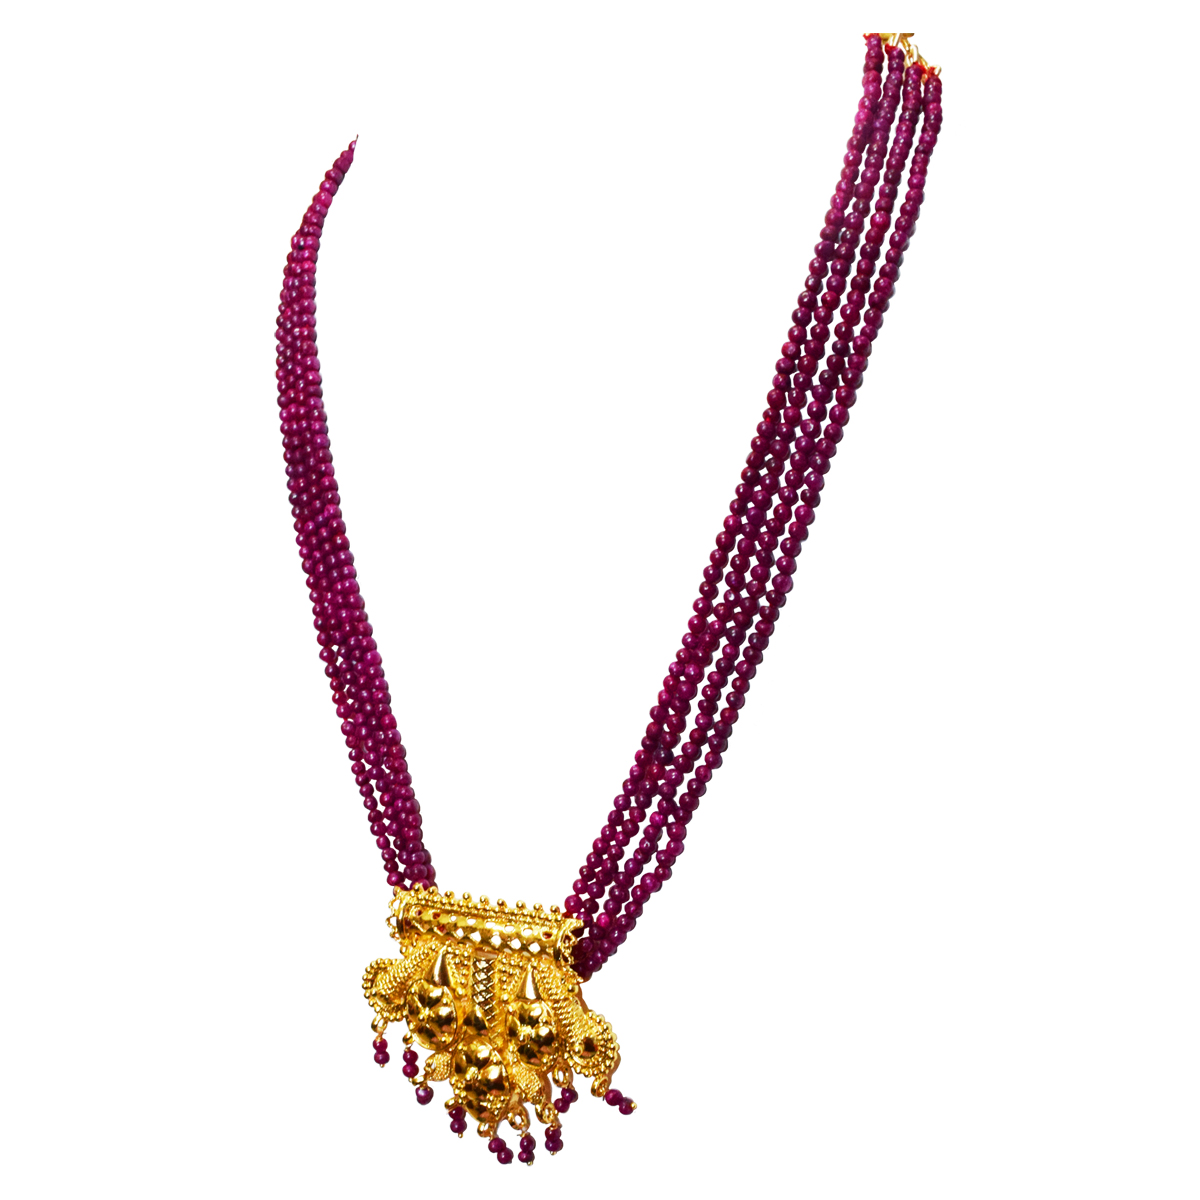 4 Line Real Red Ruby Beads & Gold Plated Pendant Necklace for Women (RBN4)